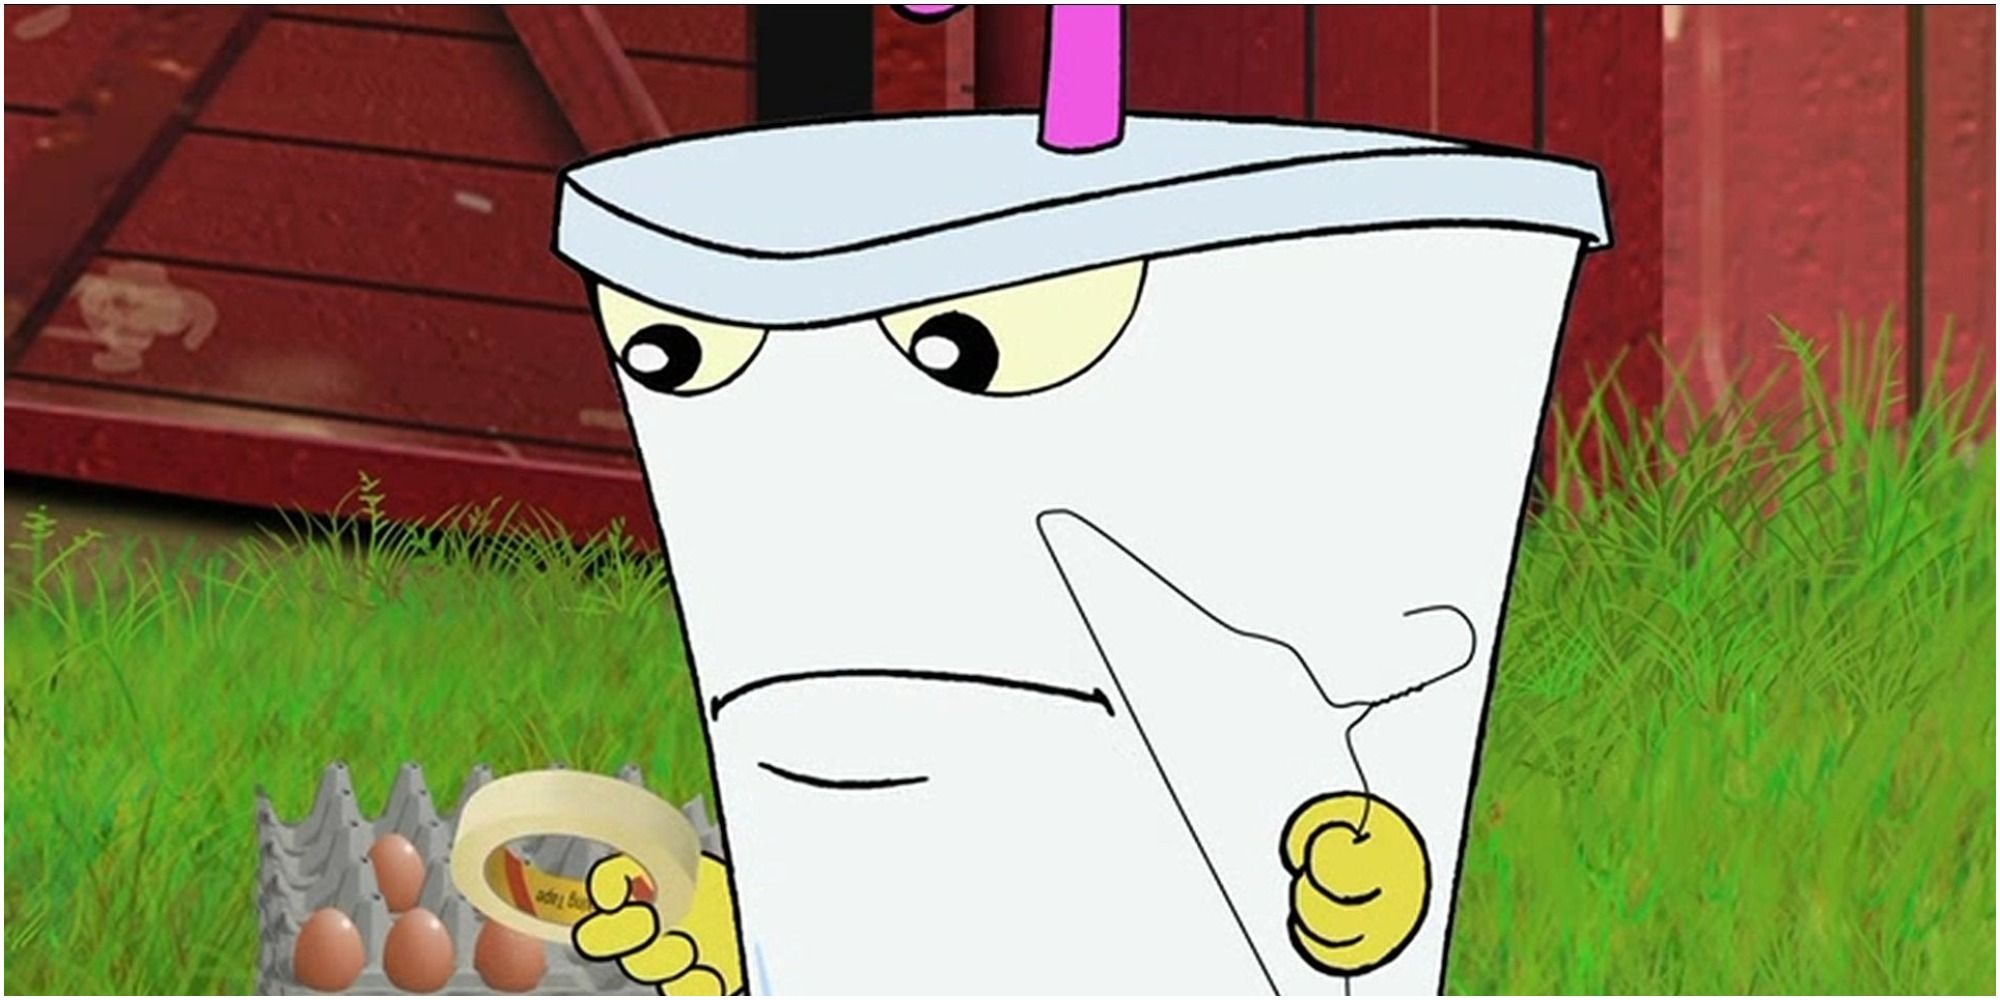 master shake holding a wire hanger and tape